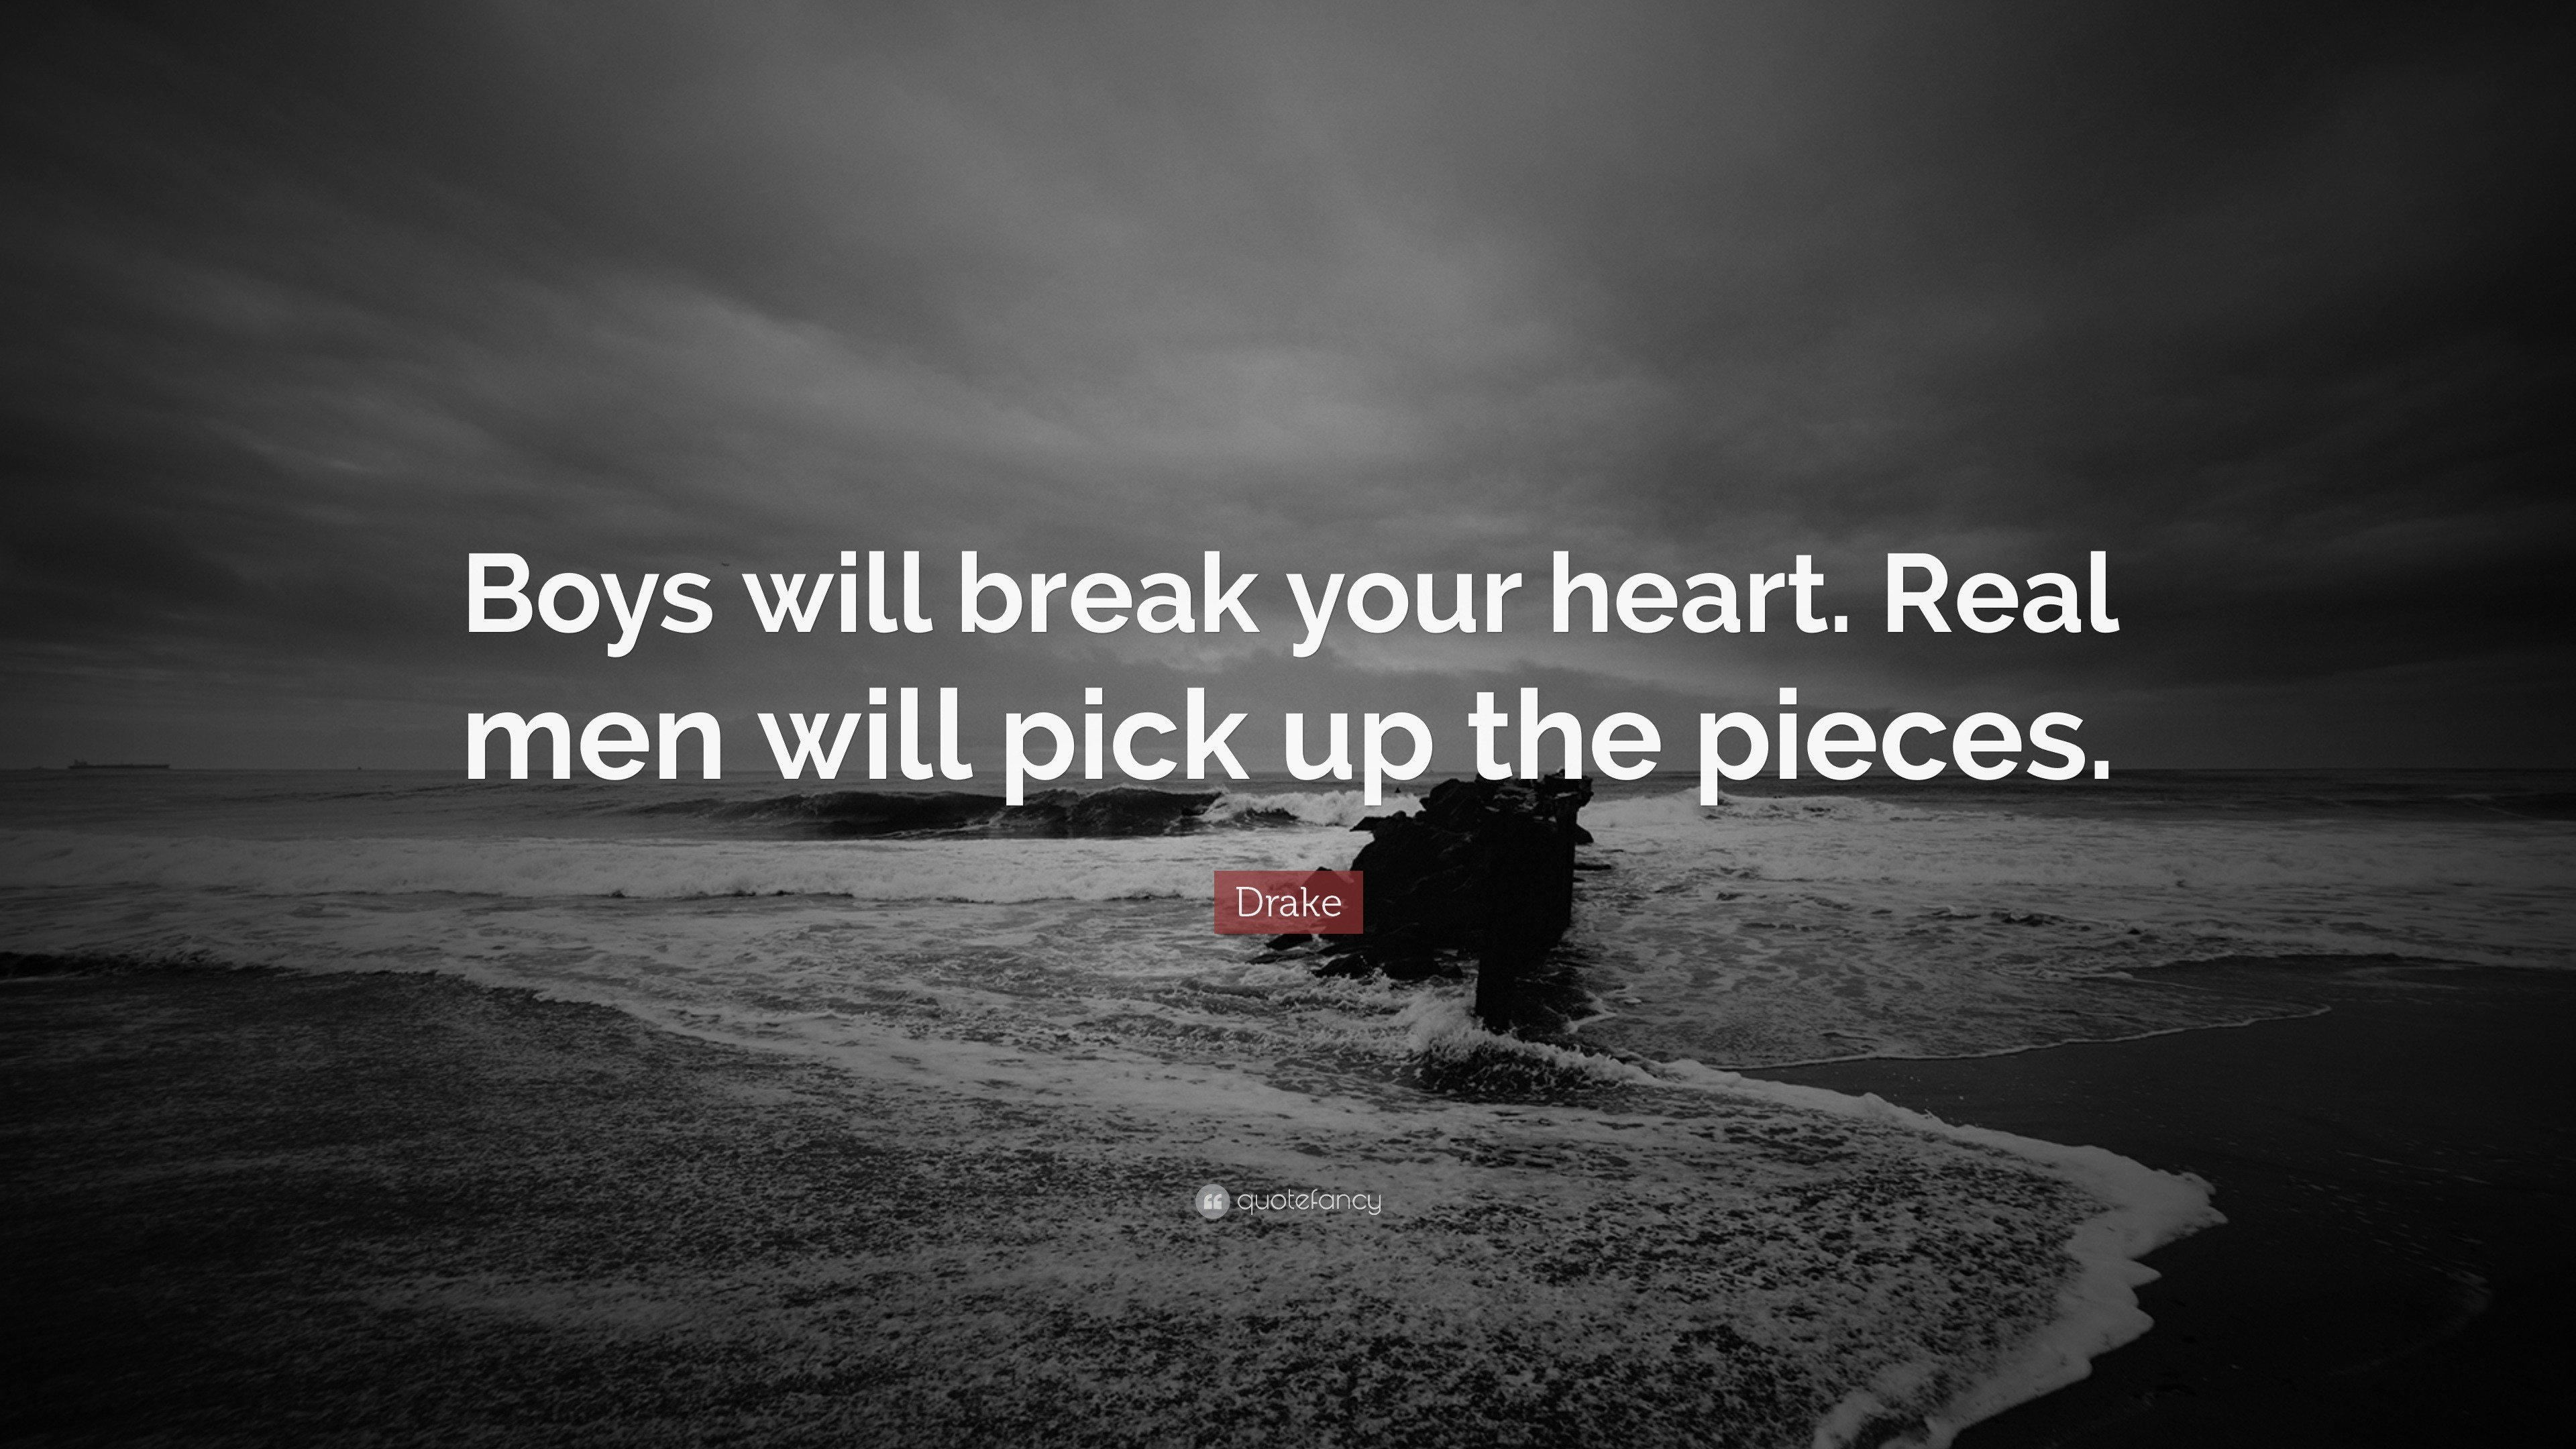 Drake Quote “Boys will break your heart Real men will pick up the